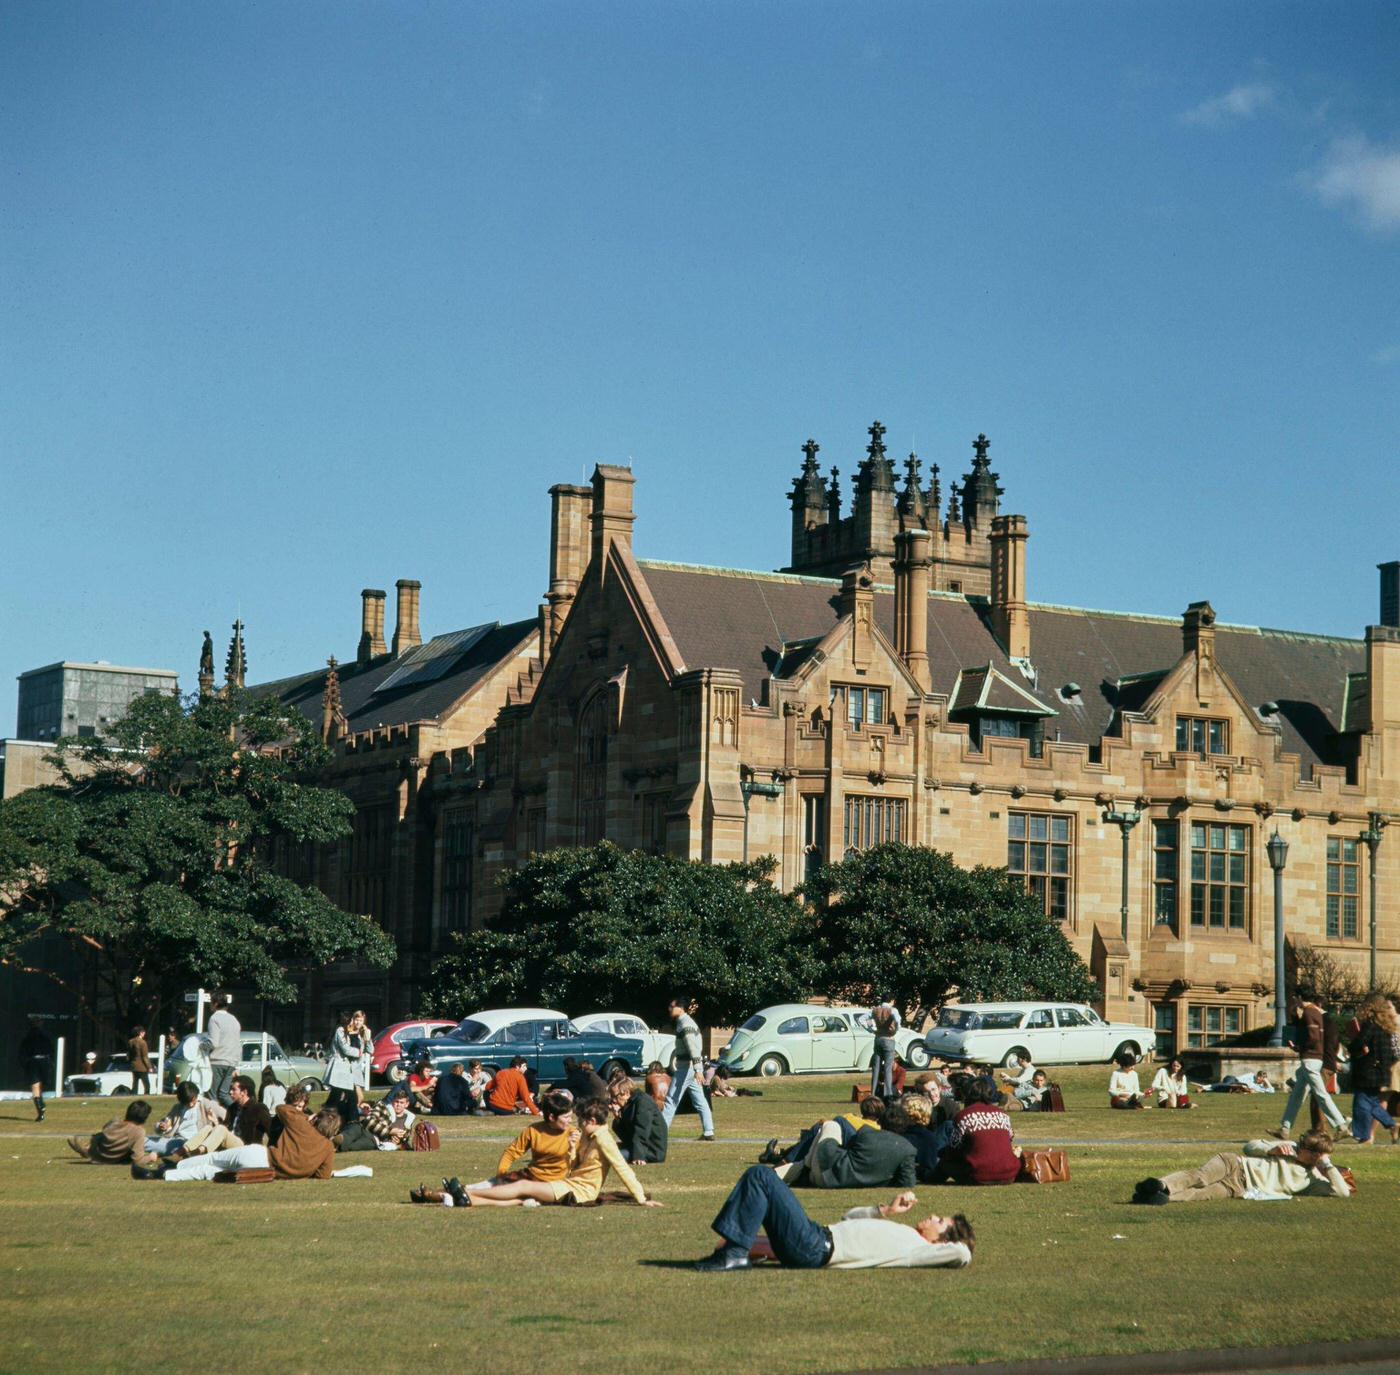 Students relax on grass lawns in front of the Main Campus Building of the University of Sydney in the Camperdown district of Sydney in New South Wales, 1965